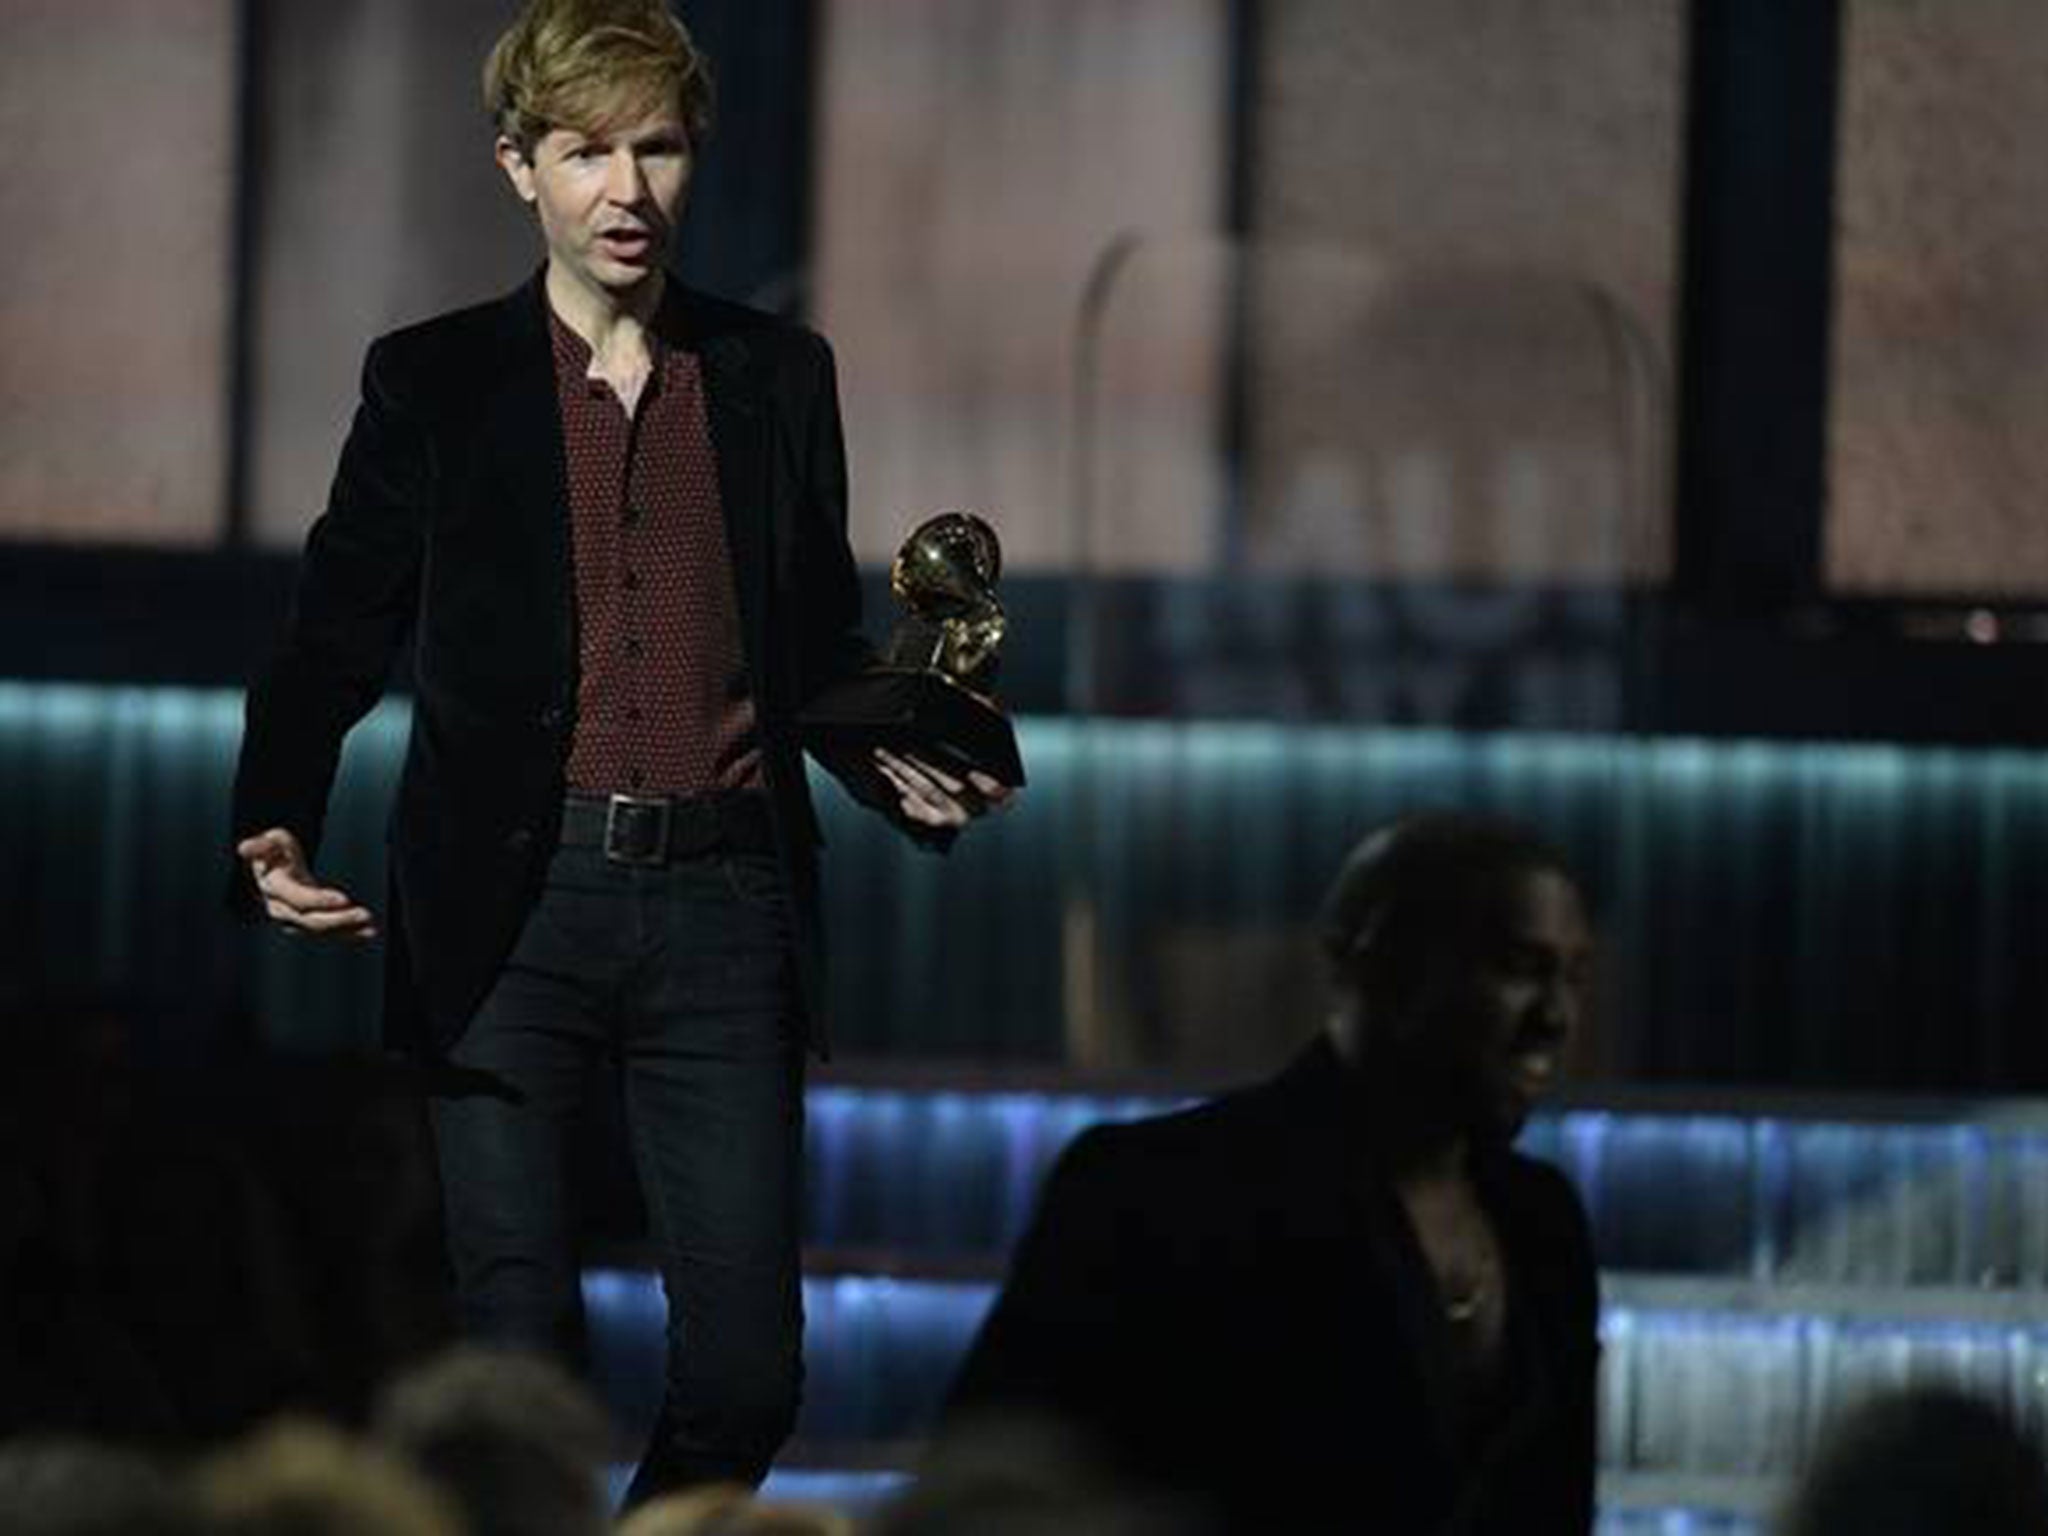 Kanye West jokingly stormed the stage during Beck's Grammys acceptance speech